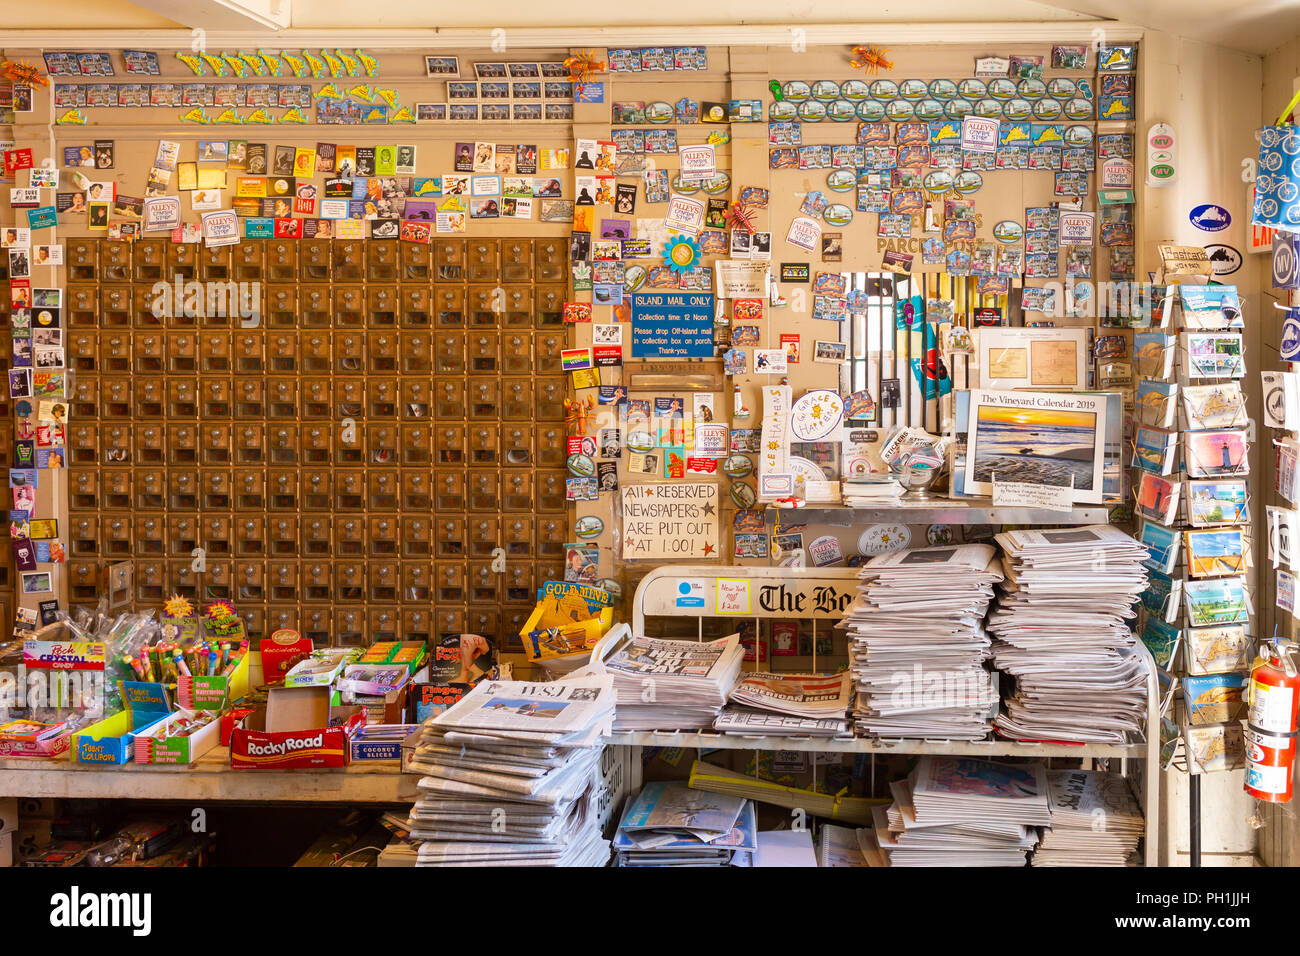 A post office and goods for sale inside historic Alley's General Store, established in 1858, in West Tisbury, Massachusetts on Martha's Vineyard. Stock Photo